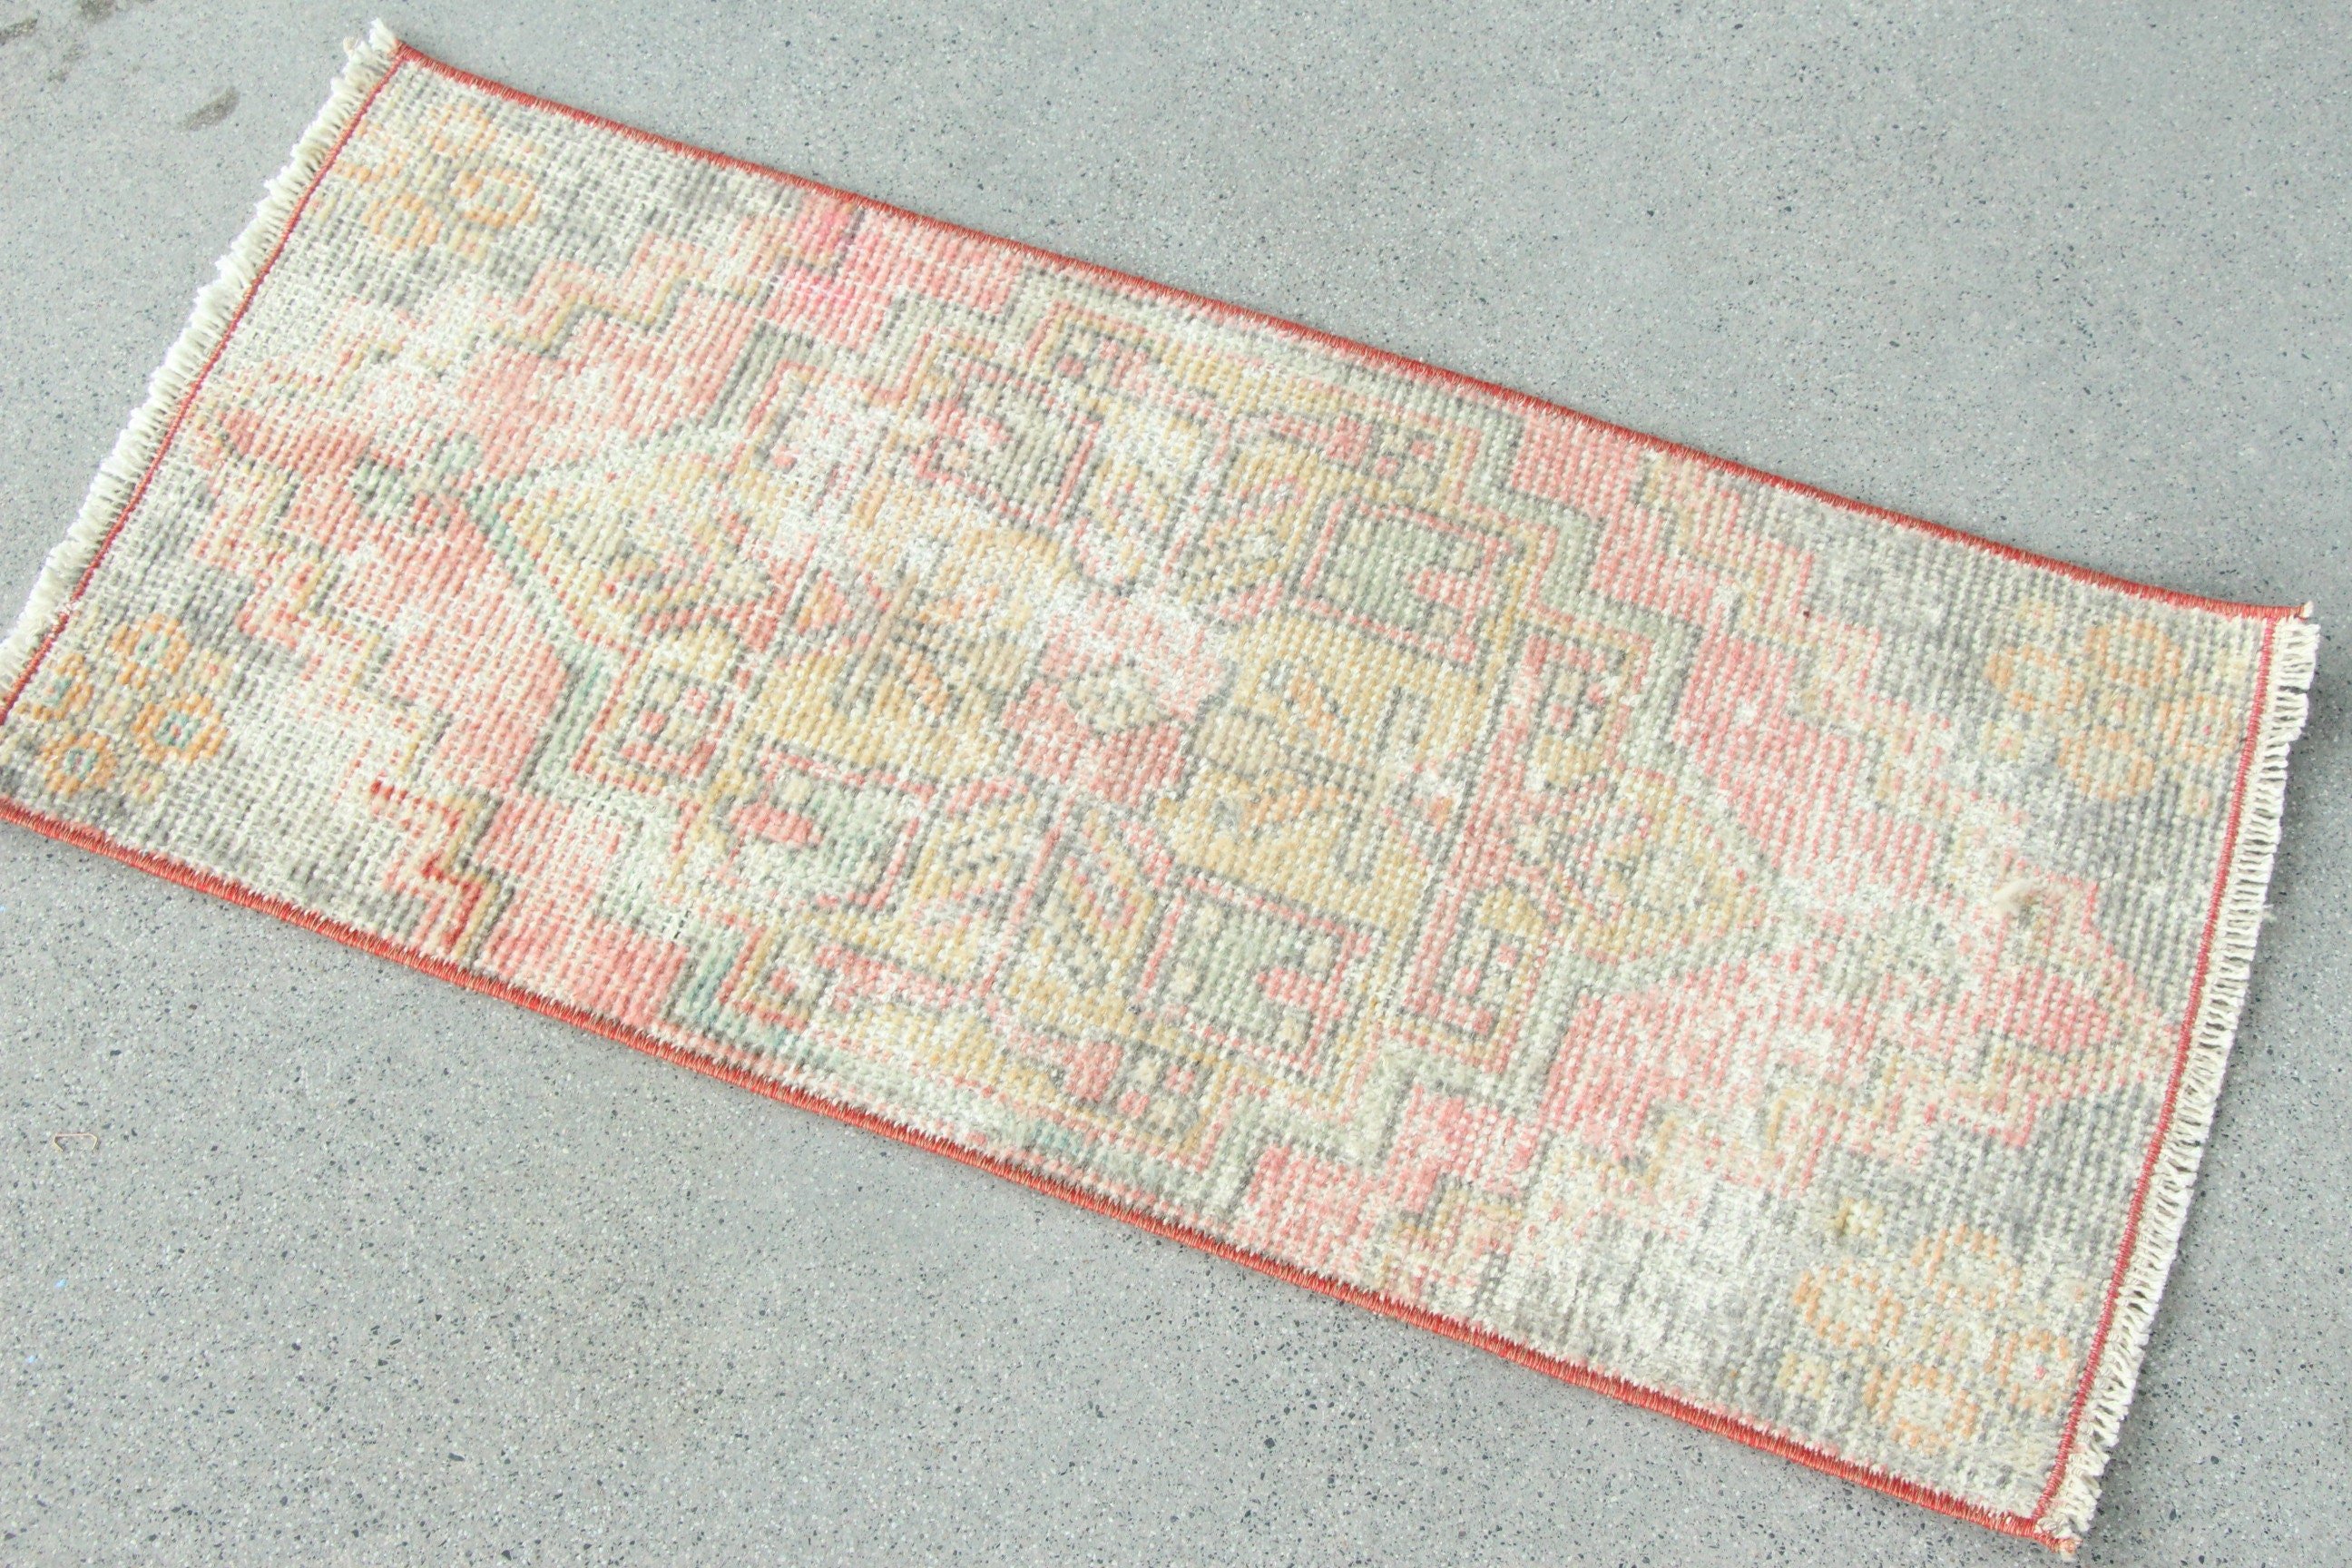 Vintage Rug, Entry Rug, 1.3x2.8 ft Small Rug, Turkish Rugs, Home Decor Rugs, Red Wool Rug, Rugs for Wall Hanging, Kitchen Rug, Wool Rug